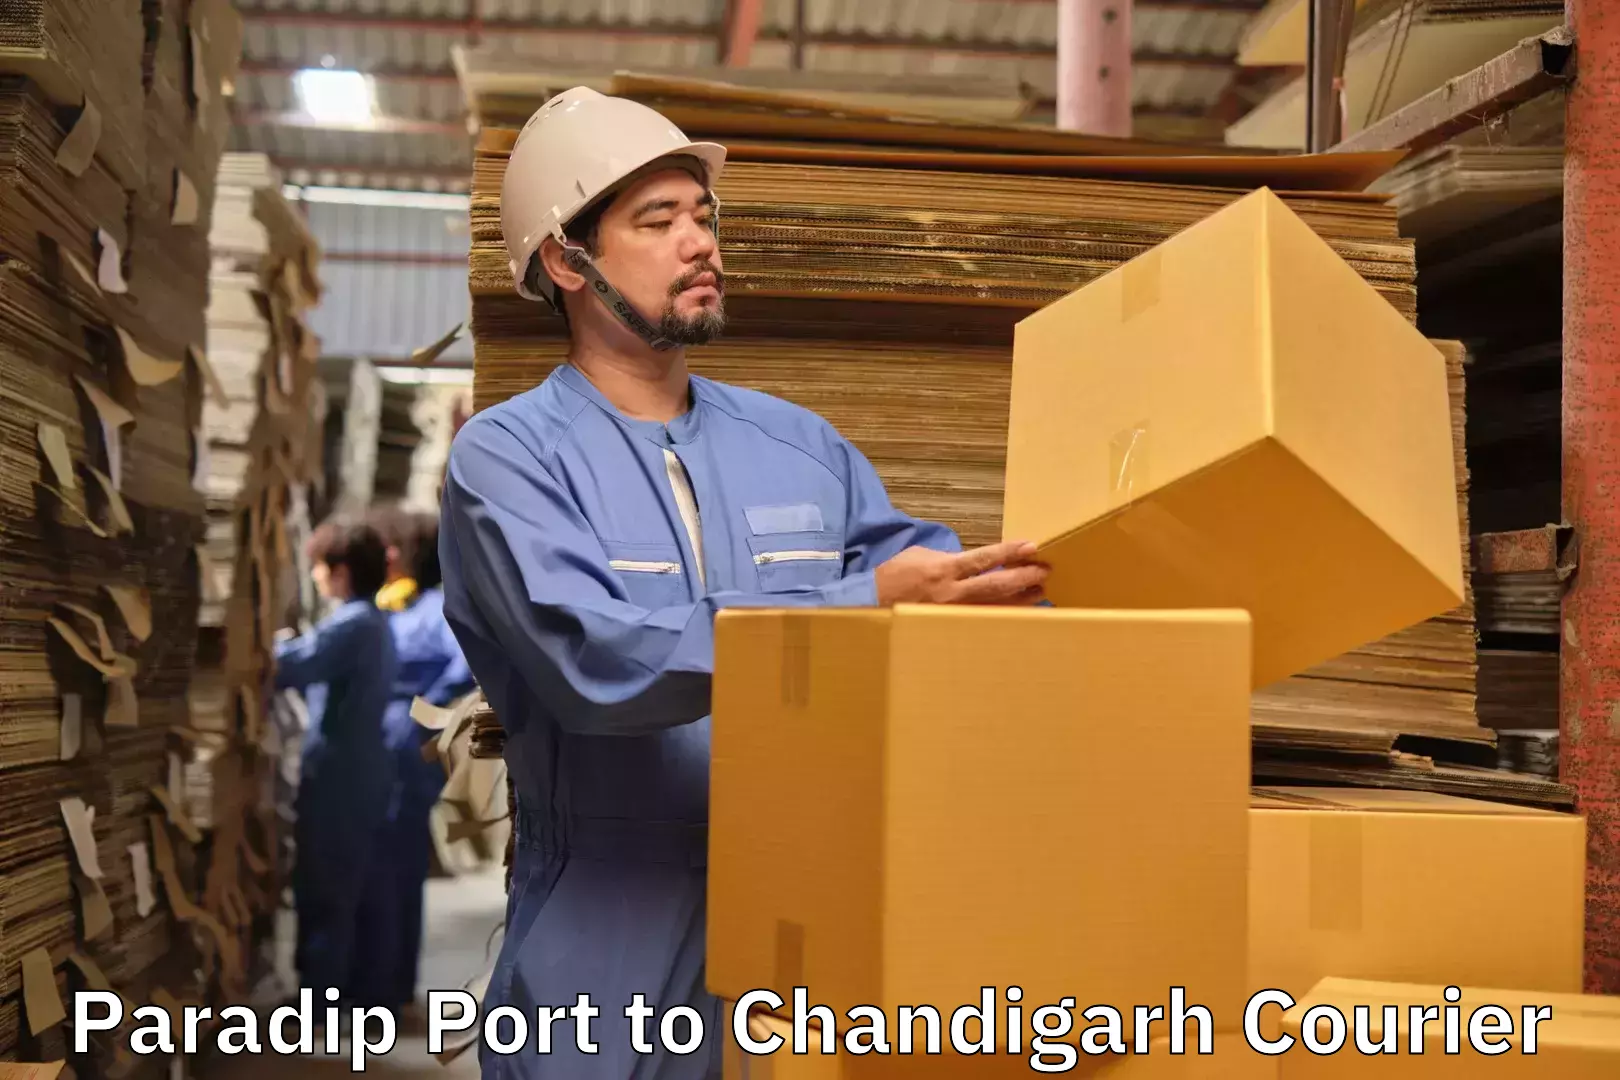 Luggage delivery app Paradip Port to Chandigarh